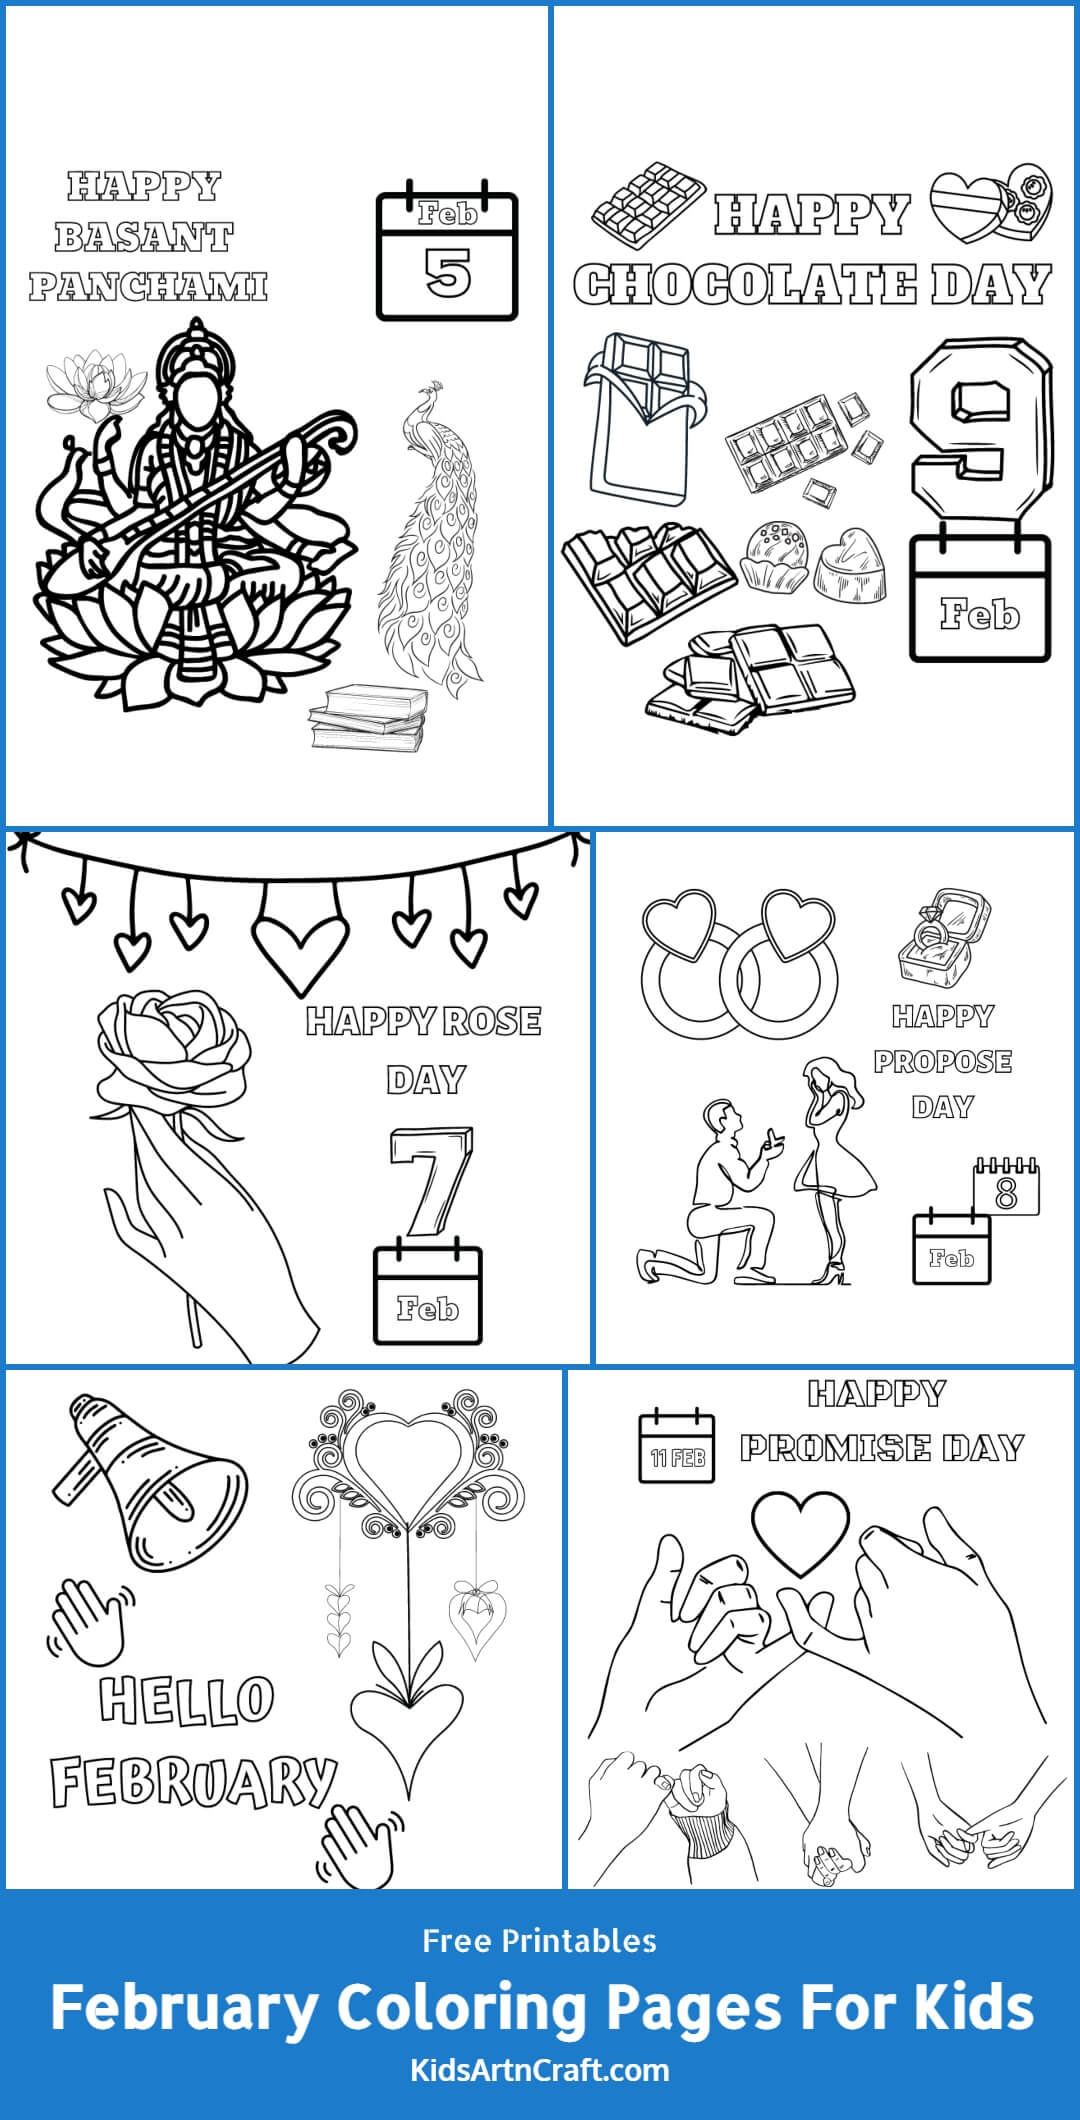 February Coloring Pages For Kids – Free Printables